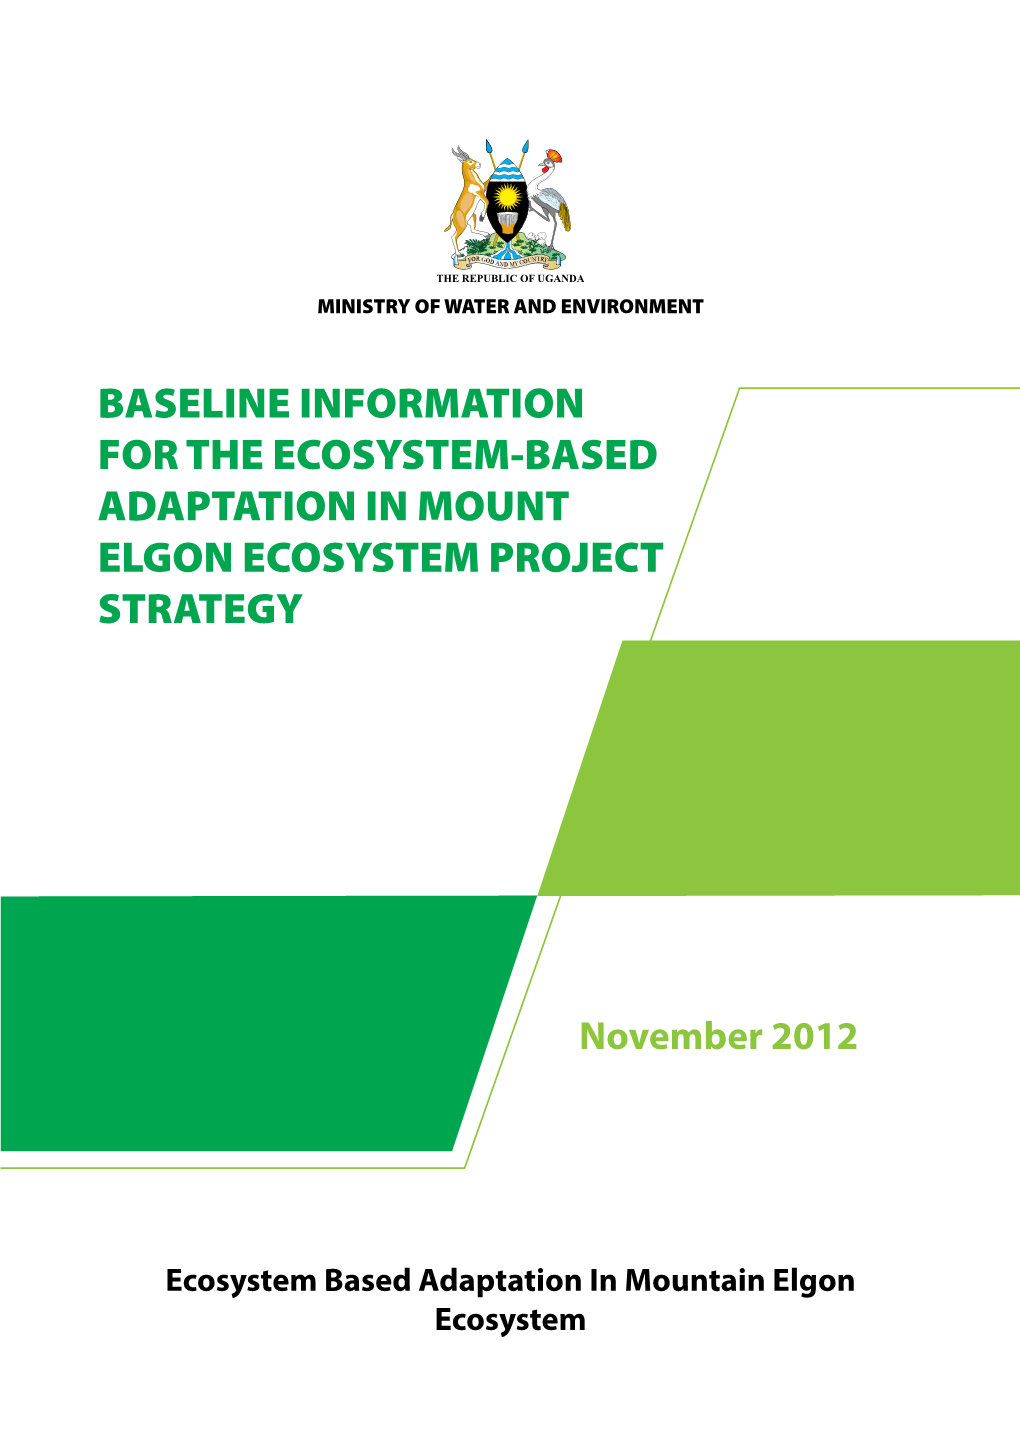 Baseline Information for the Ecosystem-Based Adaptation in Mount Elgon Ecosystem Project Strategy